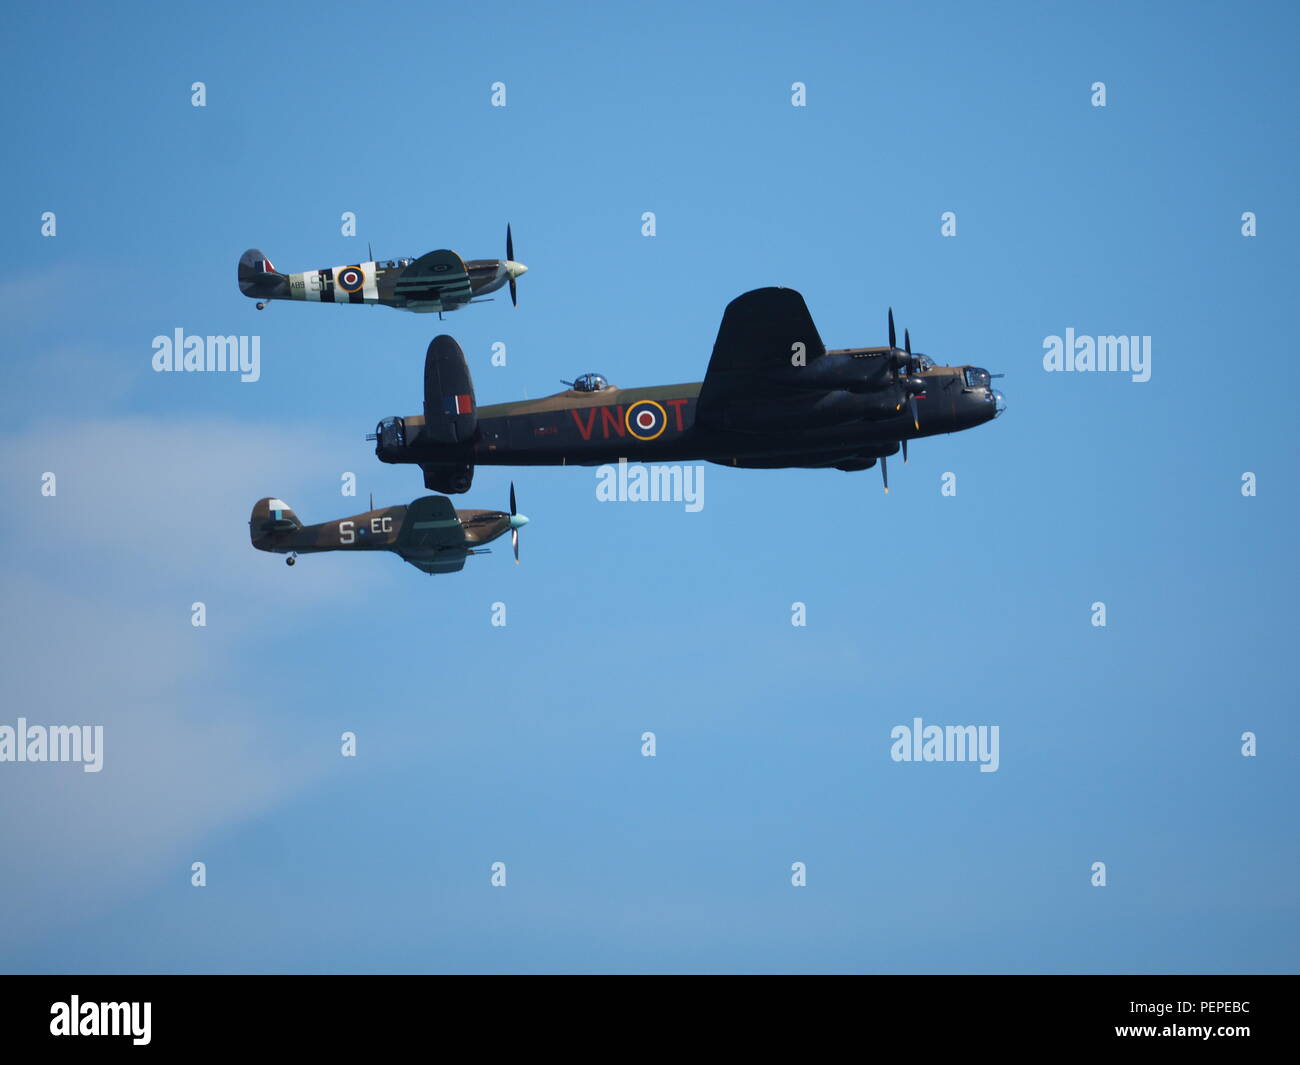 Eastbourne, UK. 17th Aug, 2018. Eastbourne Airshow: thousands lined Eastbourne seafront for day 2 of Eastbourne International Air Show in warm sunny weather. Pic: Battle of Britain Memorial Flight. Credit: James Bell/Alamy Live News Stock Photo